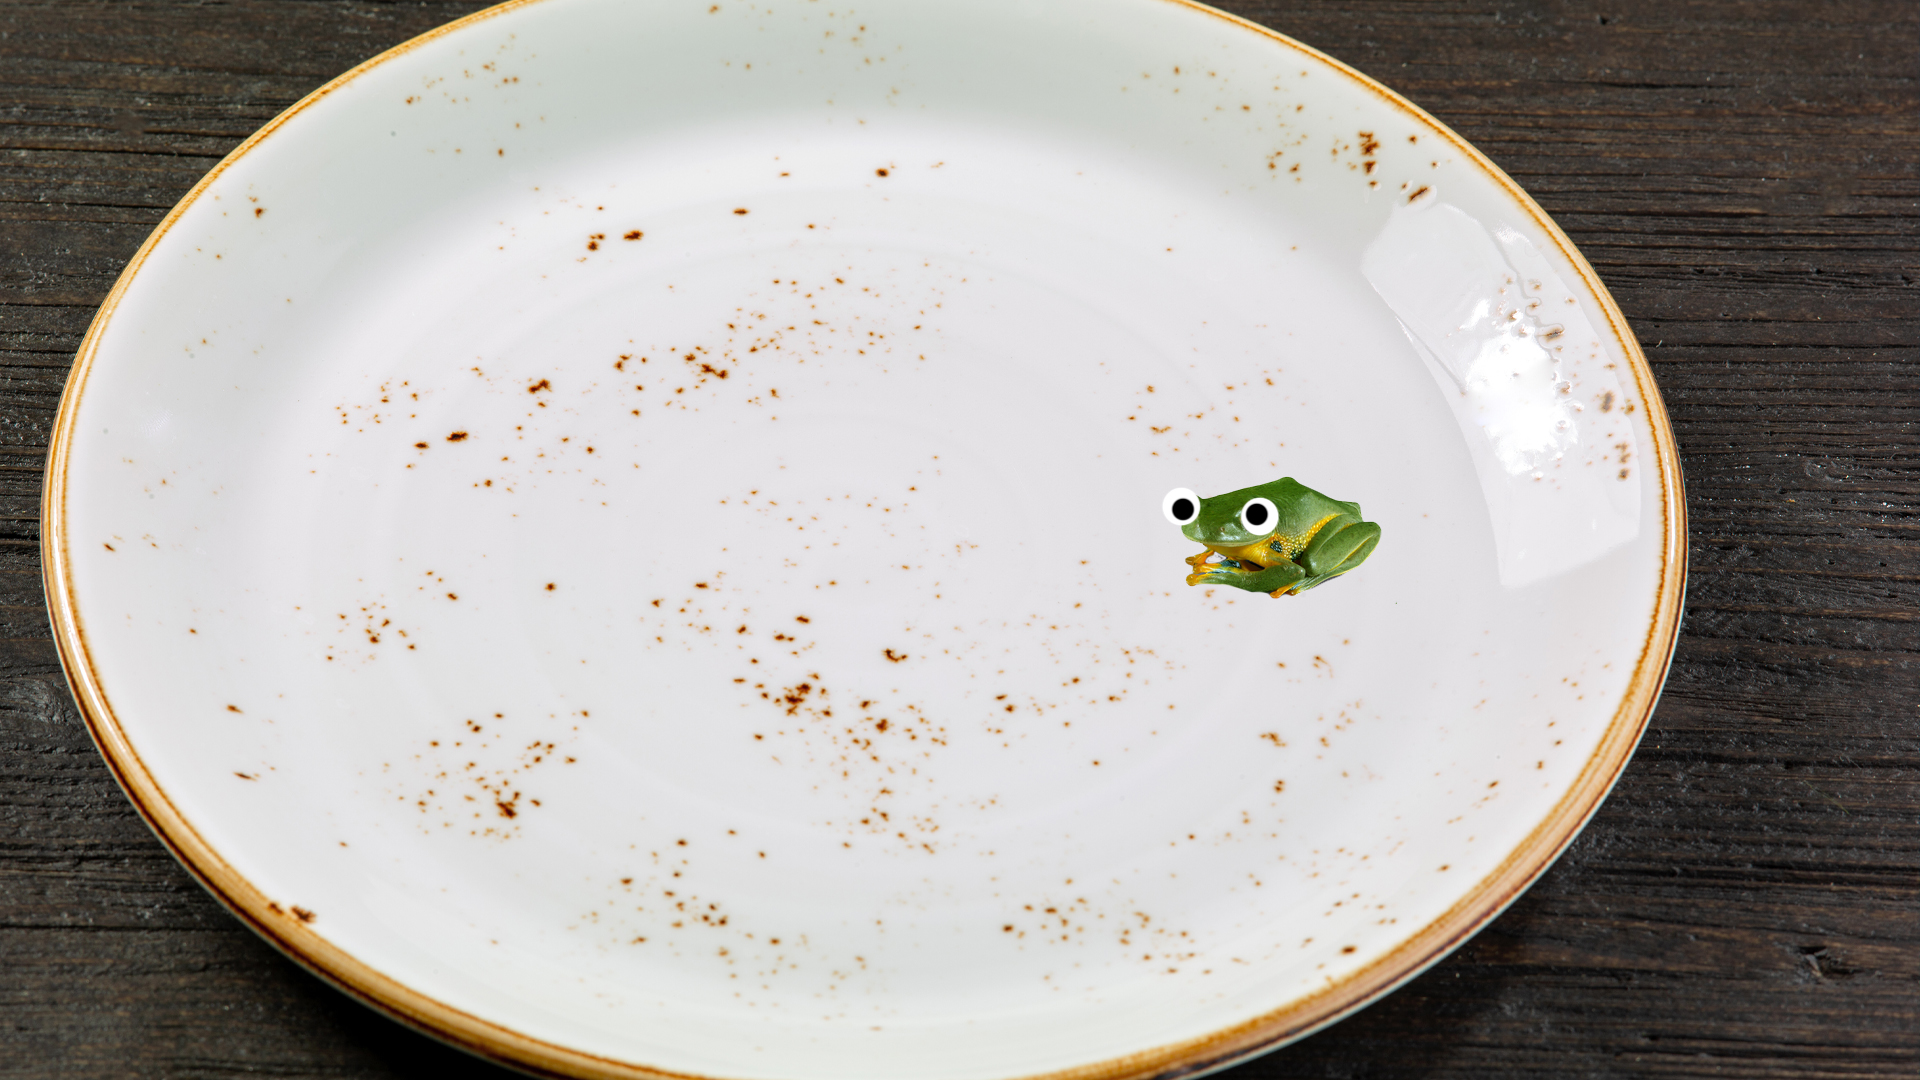 A frog on an empty plate